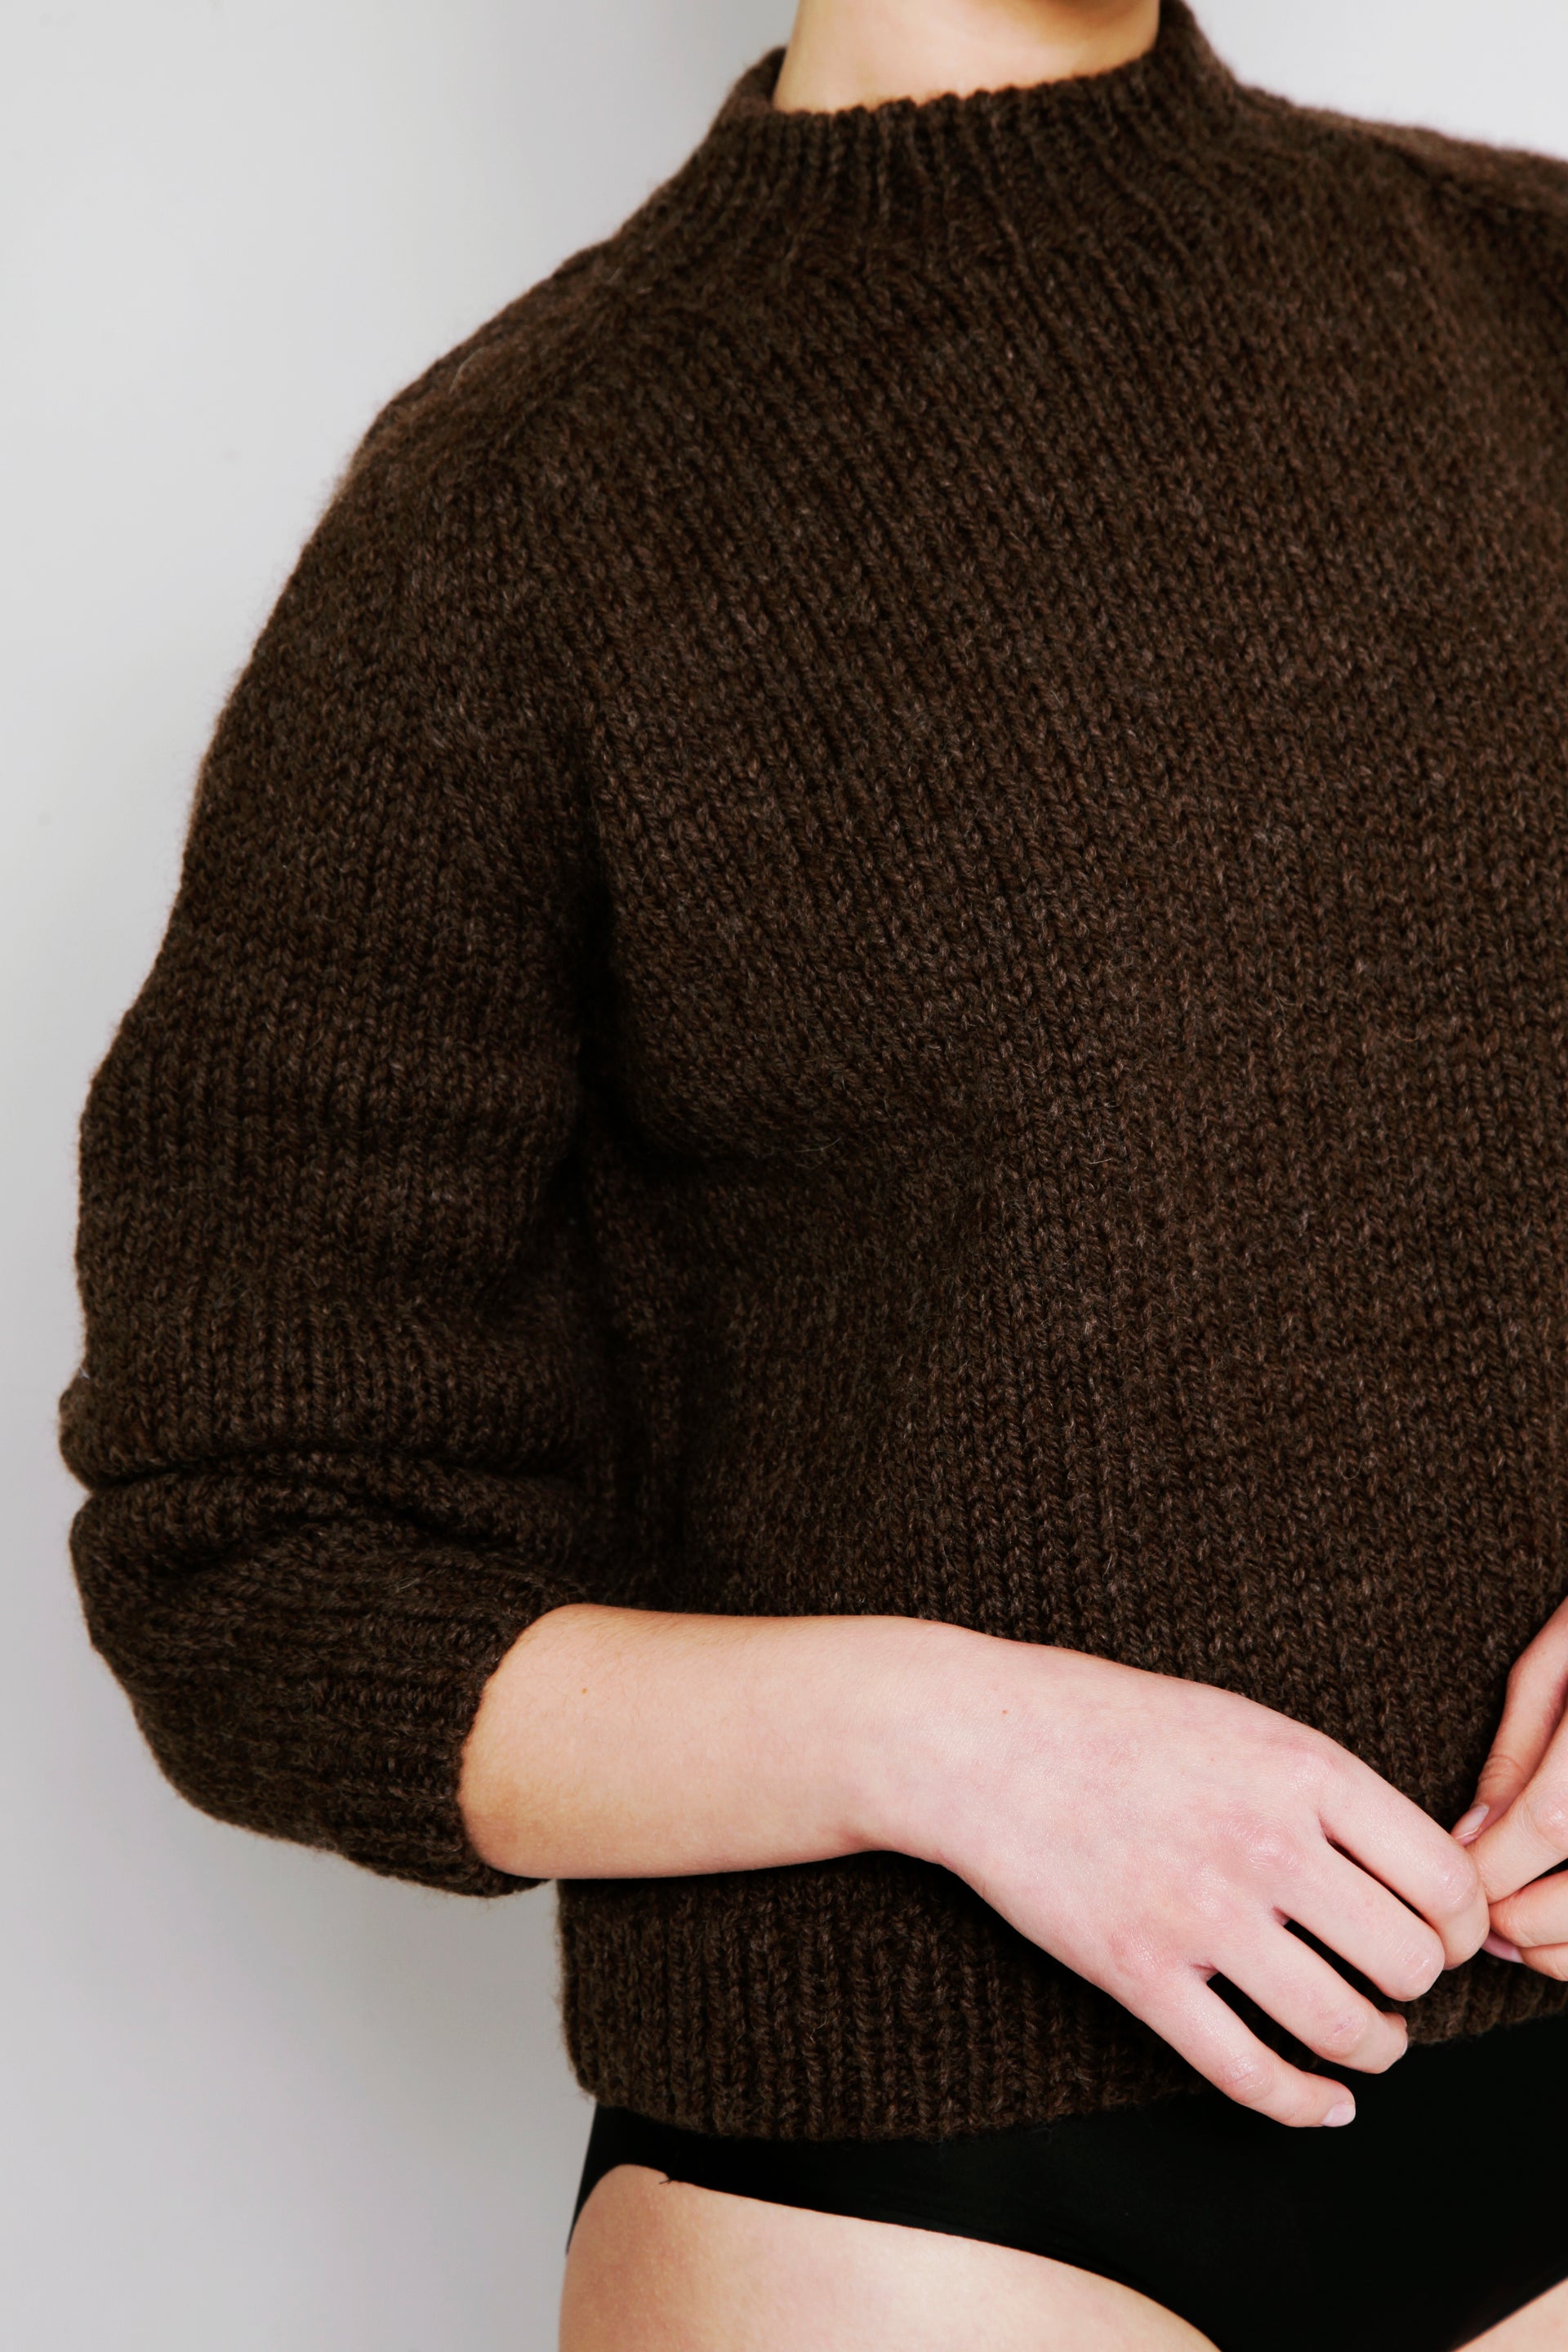 UNDYED, WOOL, HAND-KNITTED, JUMPER, SWEATER, STYLISH, SUSTAINABLE, HAND-CRAFTED, WOMENSWEAR 